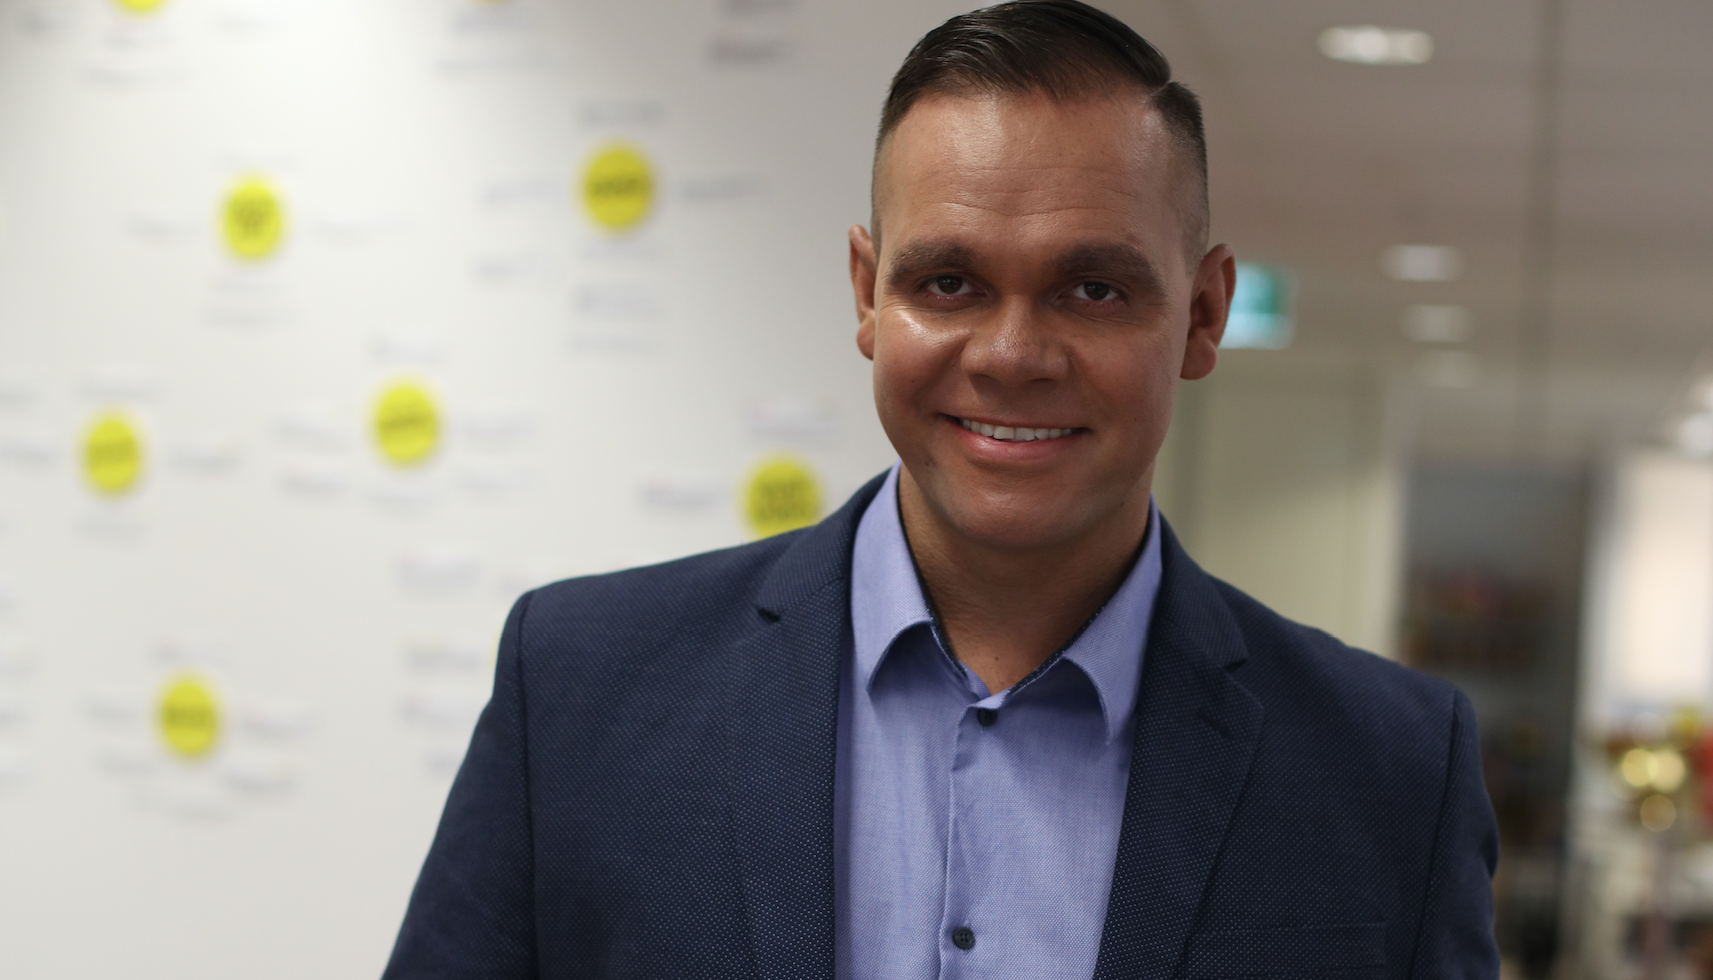 ‘I didn’t have a gay, Aboriginal role model and that’s what I needed most’